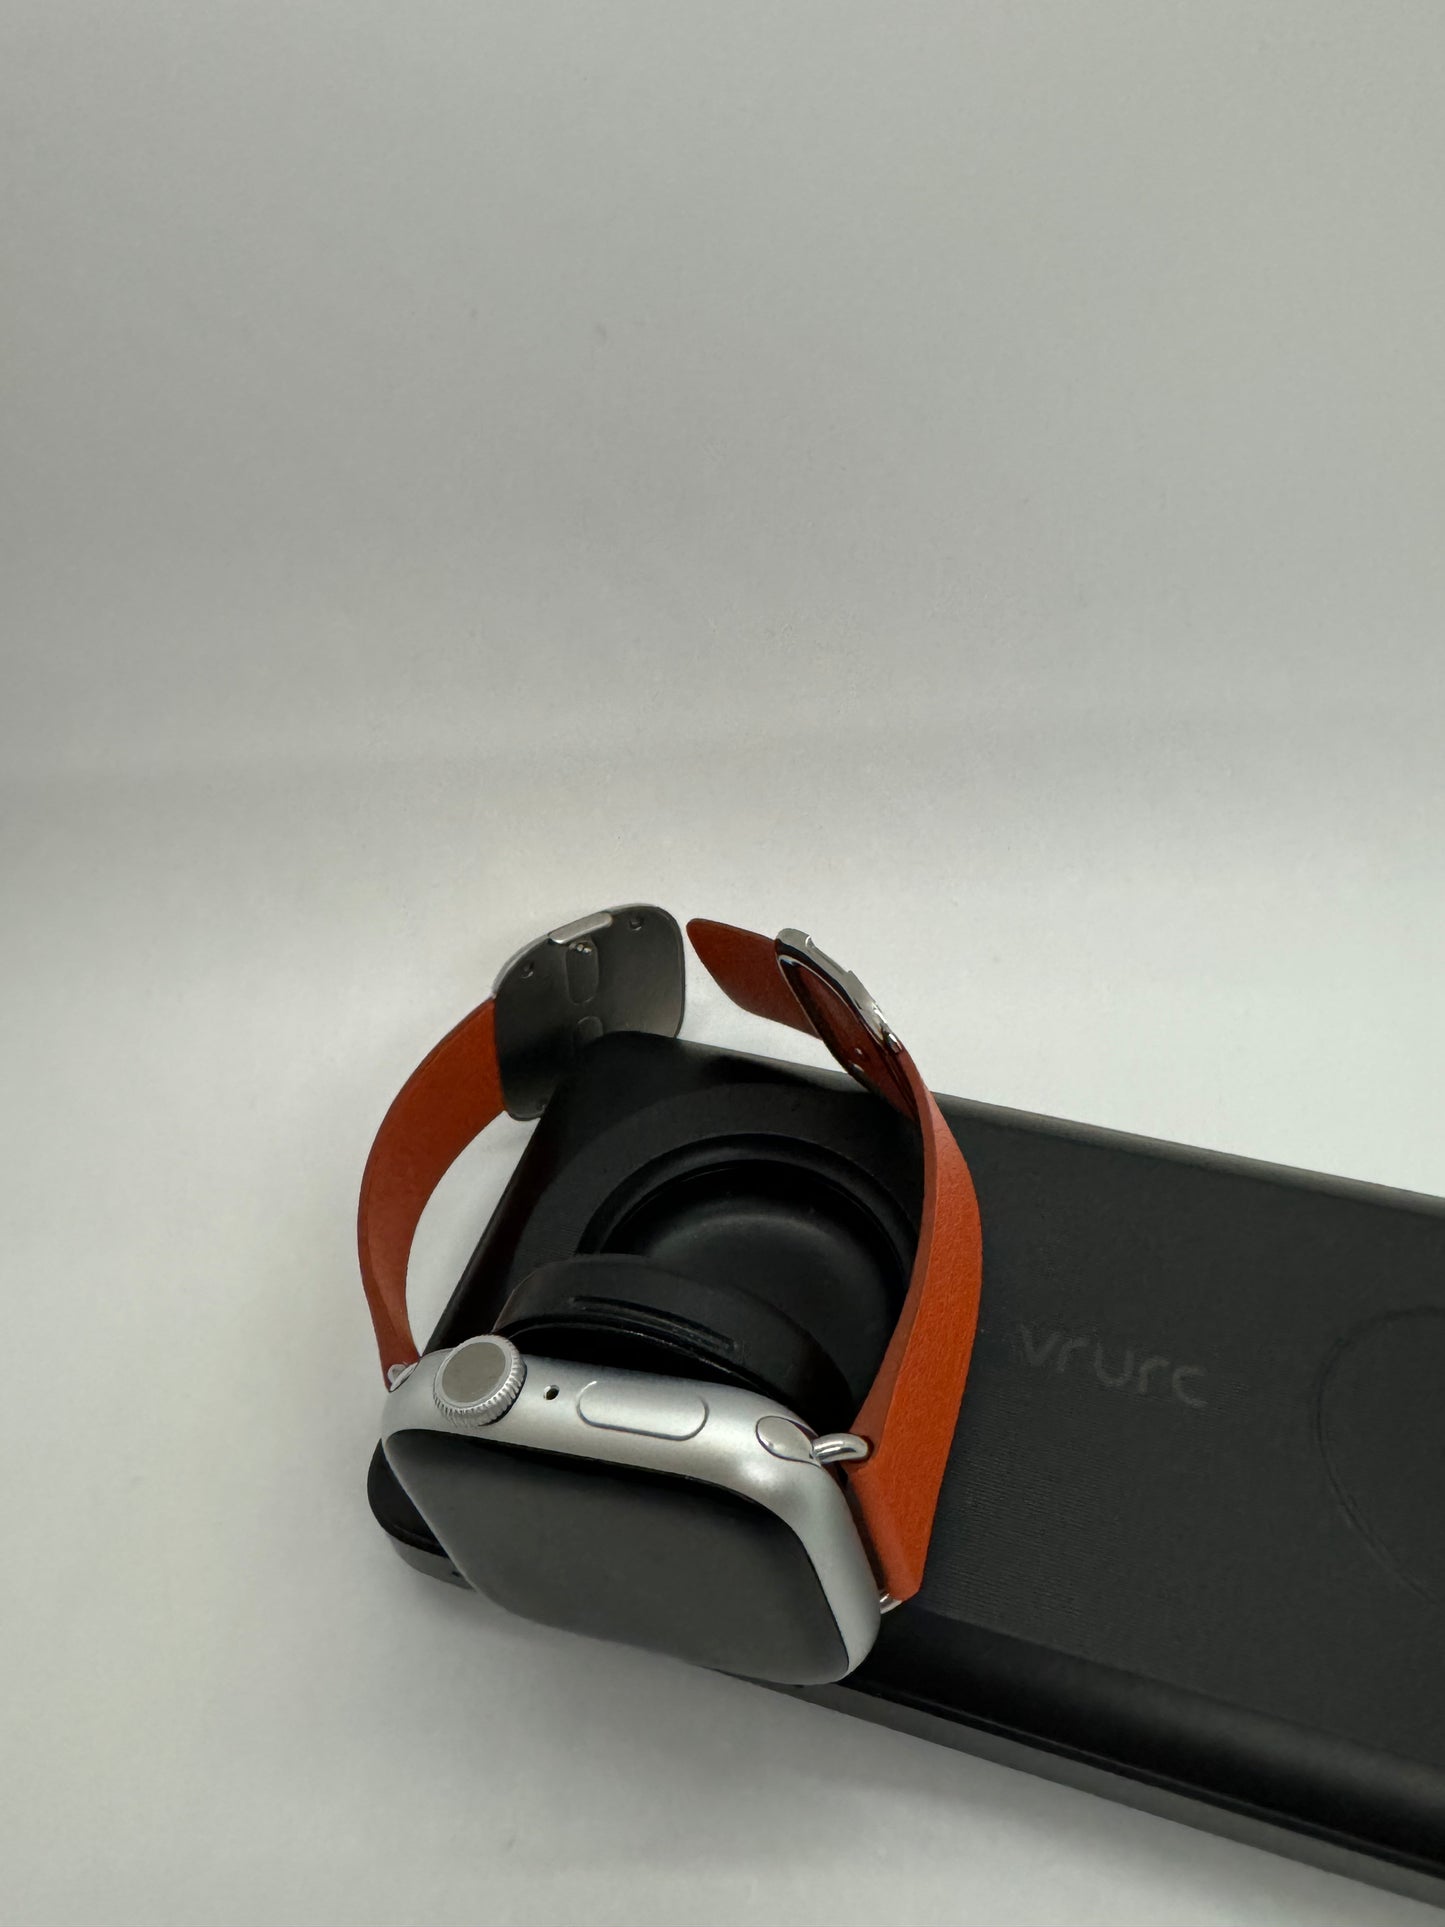 The picture shows a smartwatch with a brown leather strap. The watch is placed on top of a black rectangular object that appears to be a case or a box. The smartwatch has a silver body with a round dial and a button on the side. The black case or box has the word "vrurc" written on it in lowercase letters. The background of the picture is plain white.